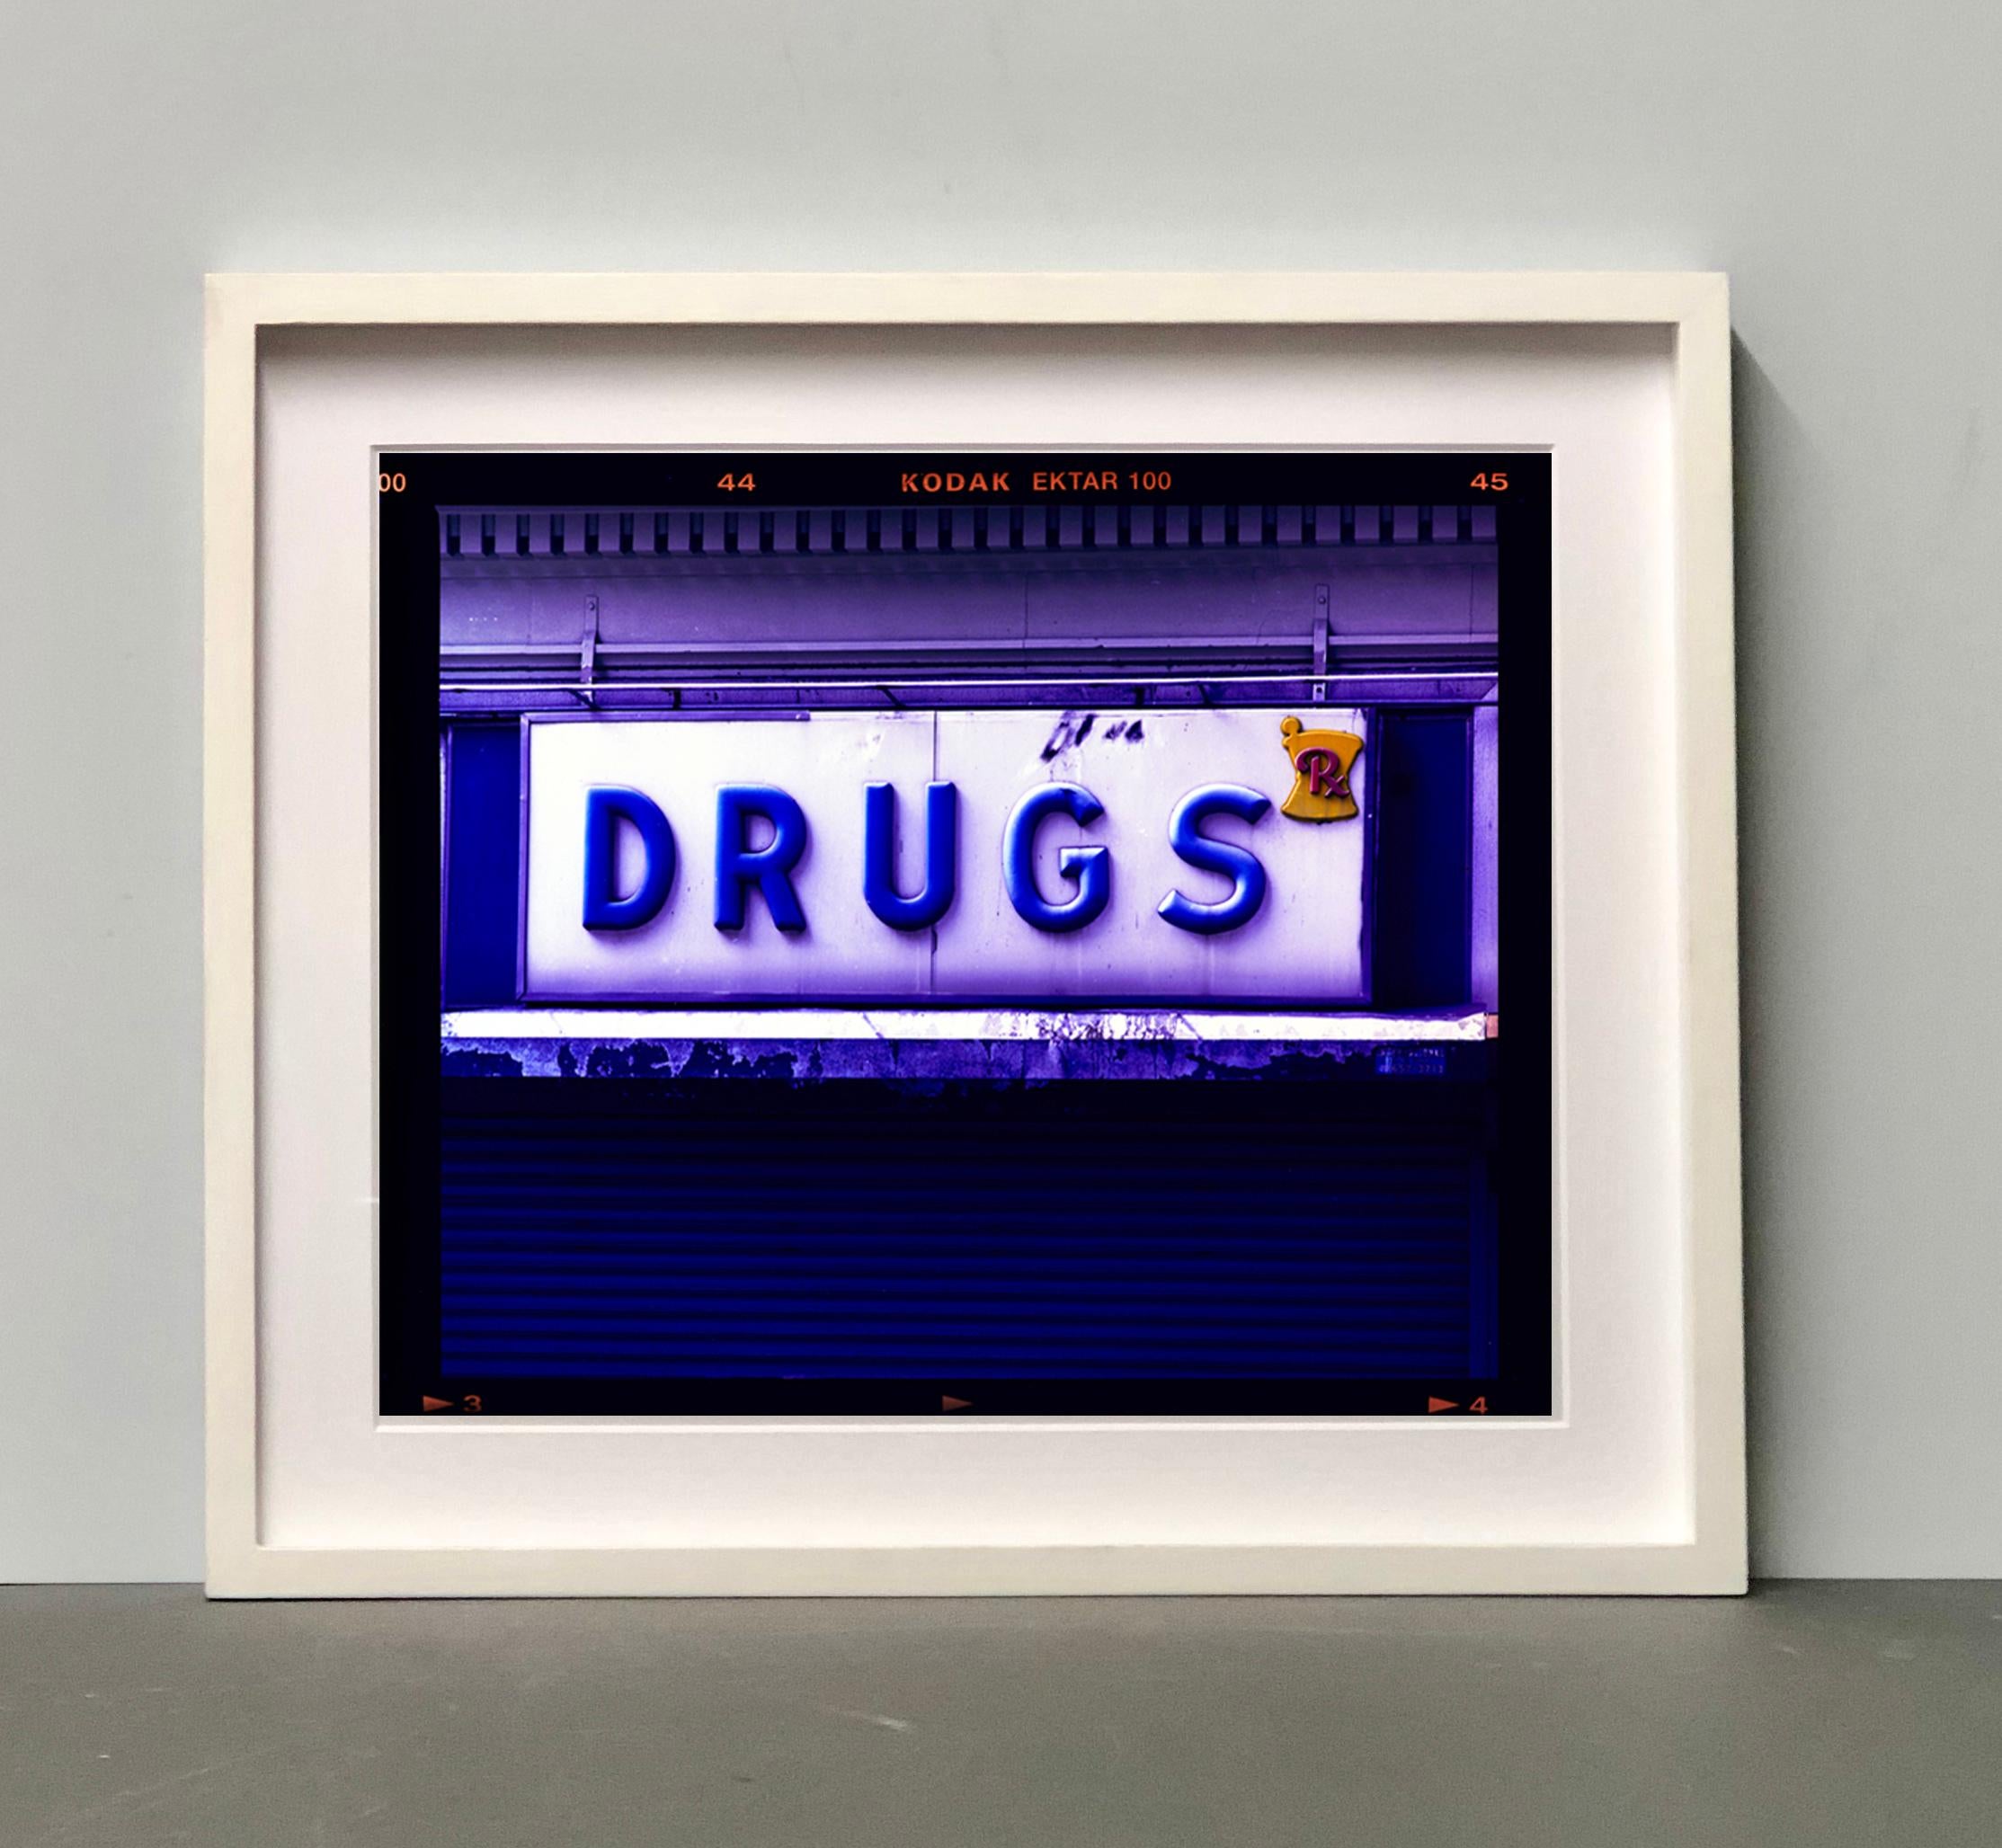 Drugs, part of Richard's portfolio of street photography he is building up which depict the colour, fabric and structure of cities with distinct style. As New York changes in the face of development Richard is keen to capture original